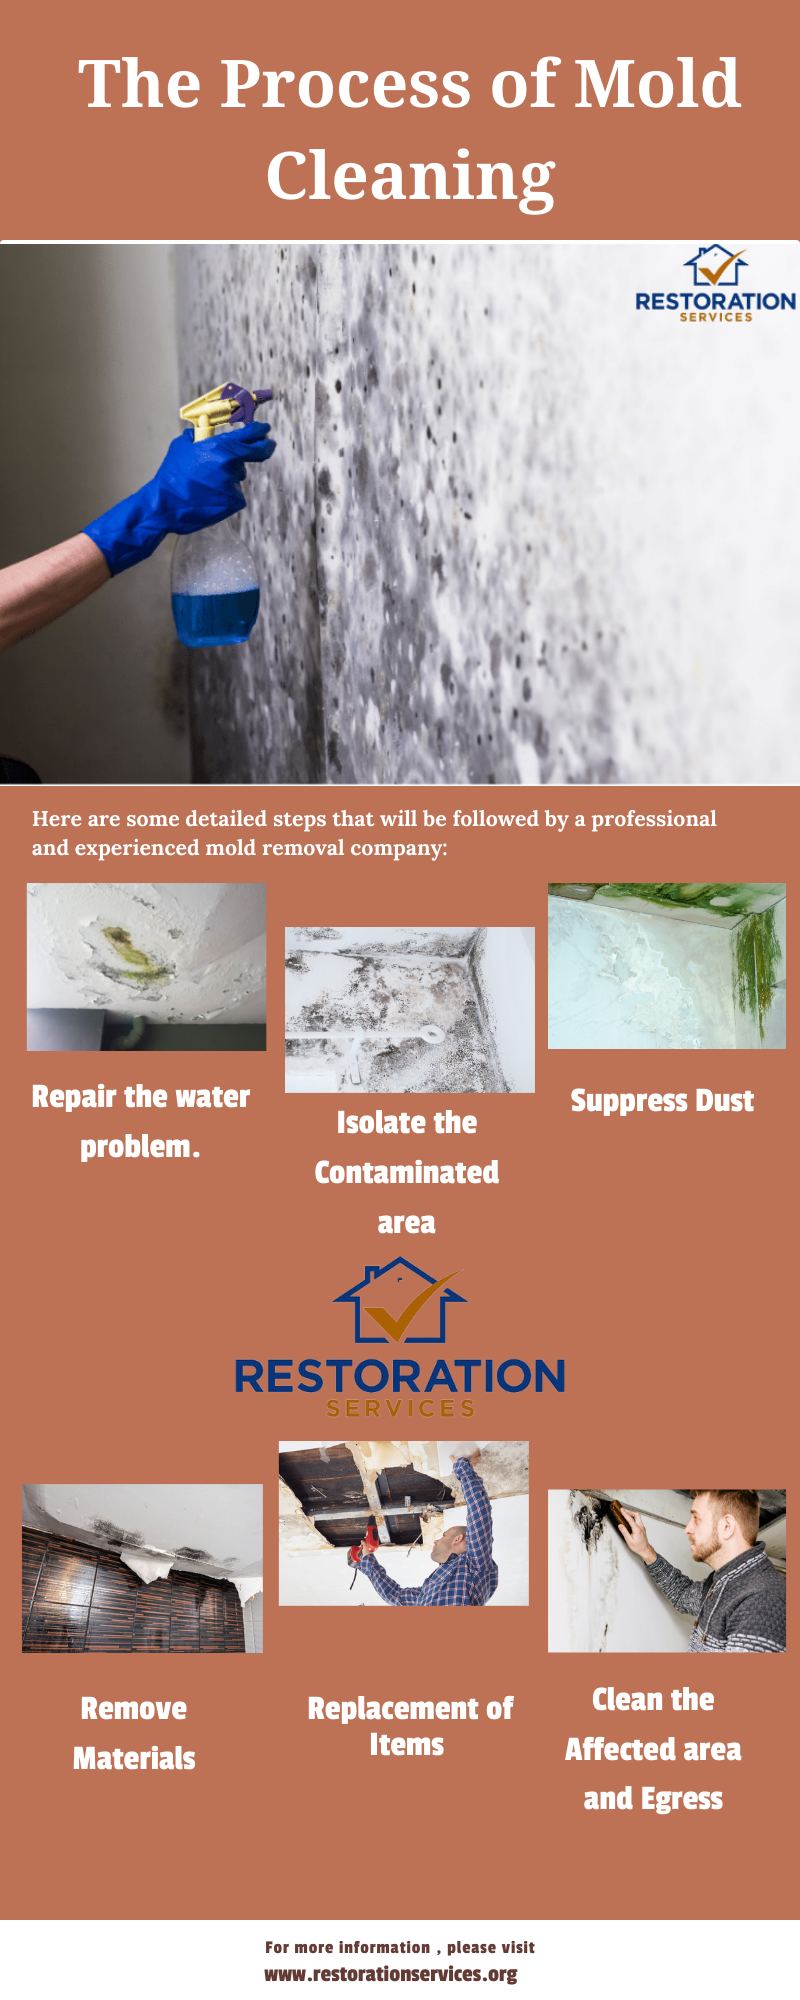 The Process of Mold Cleaning